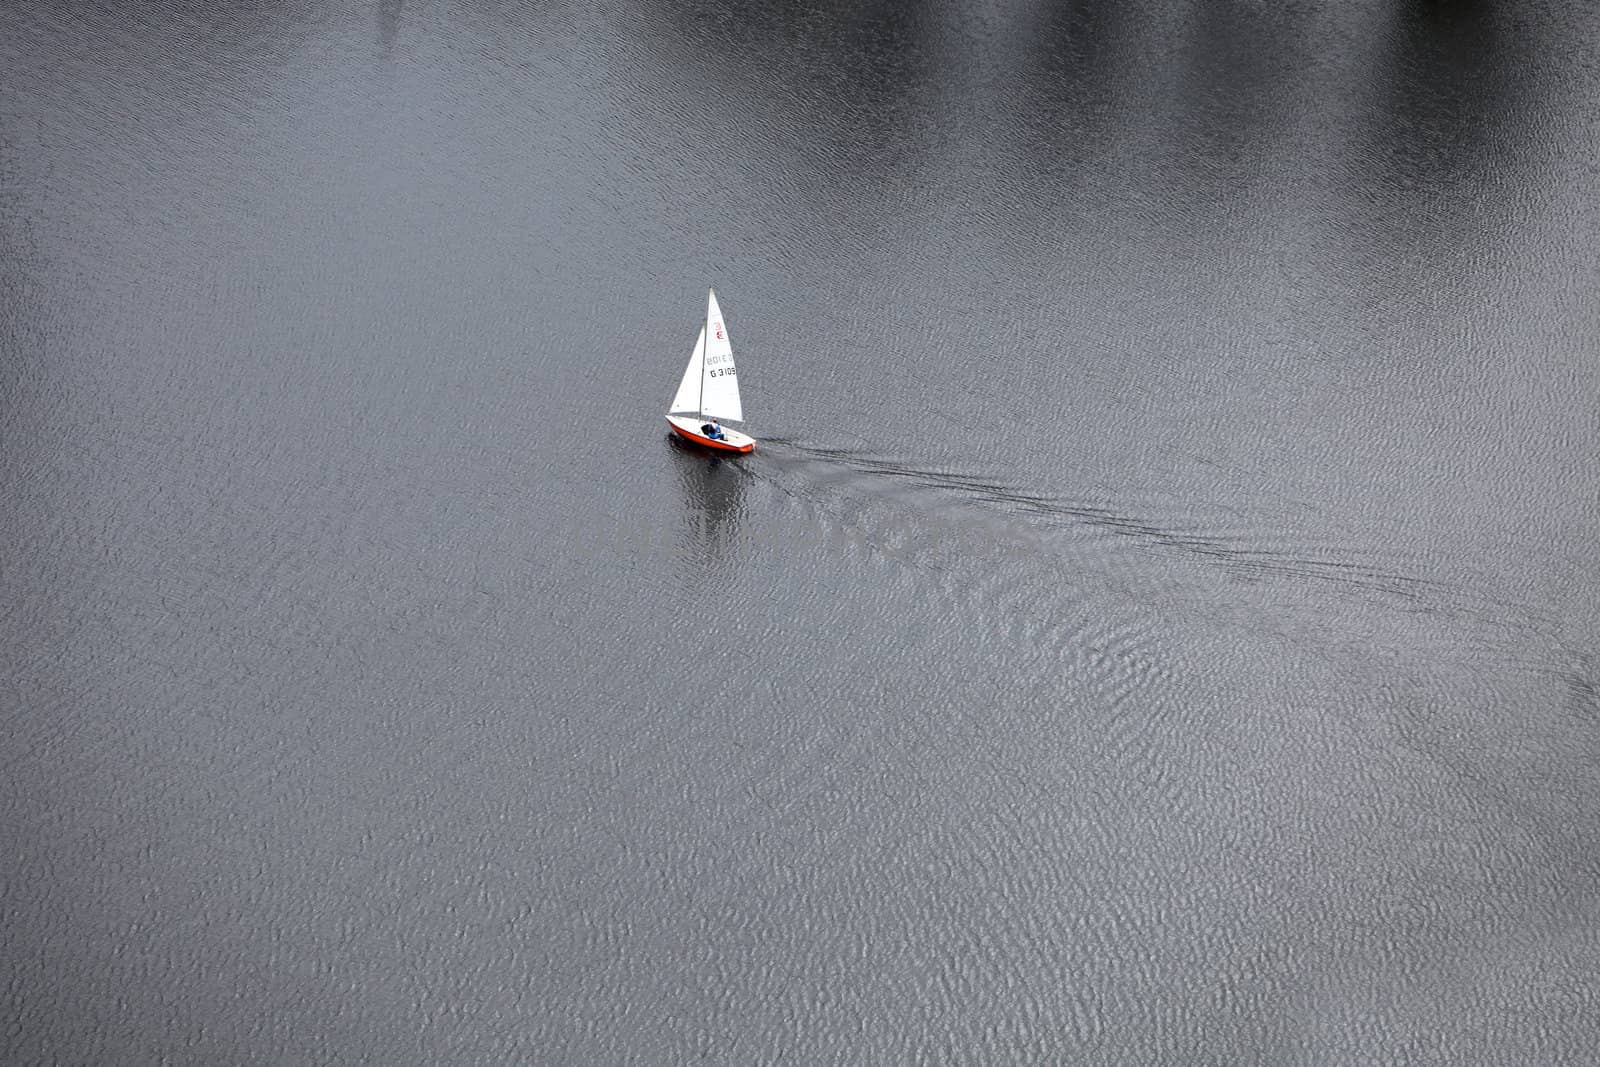 Aerial photograph of a white sailboat, sailing alone in the sea or river.